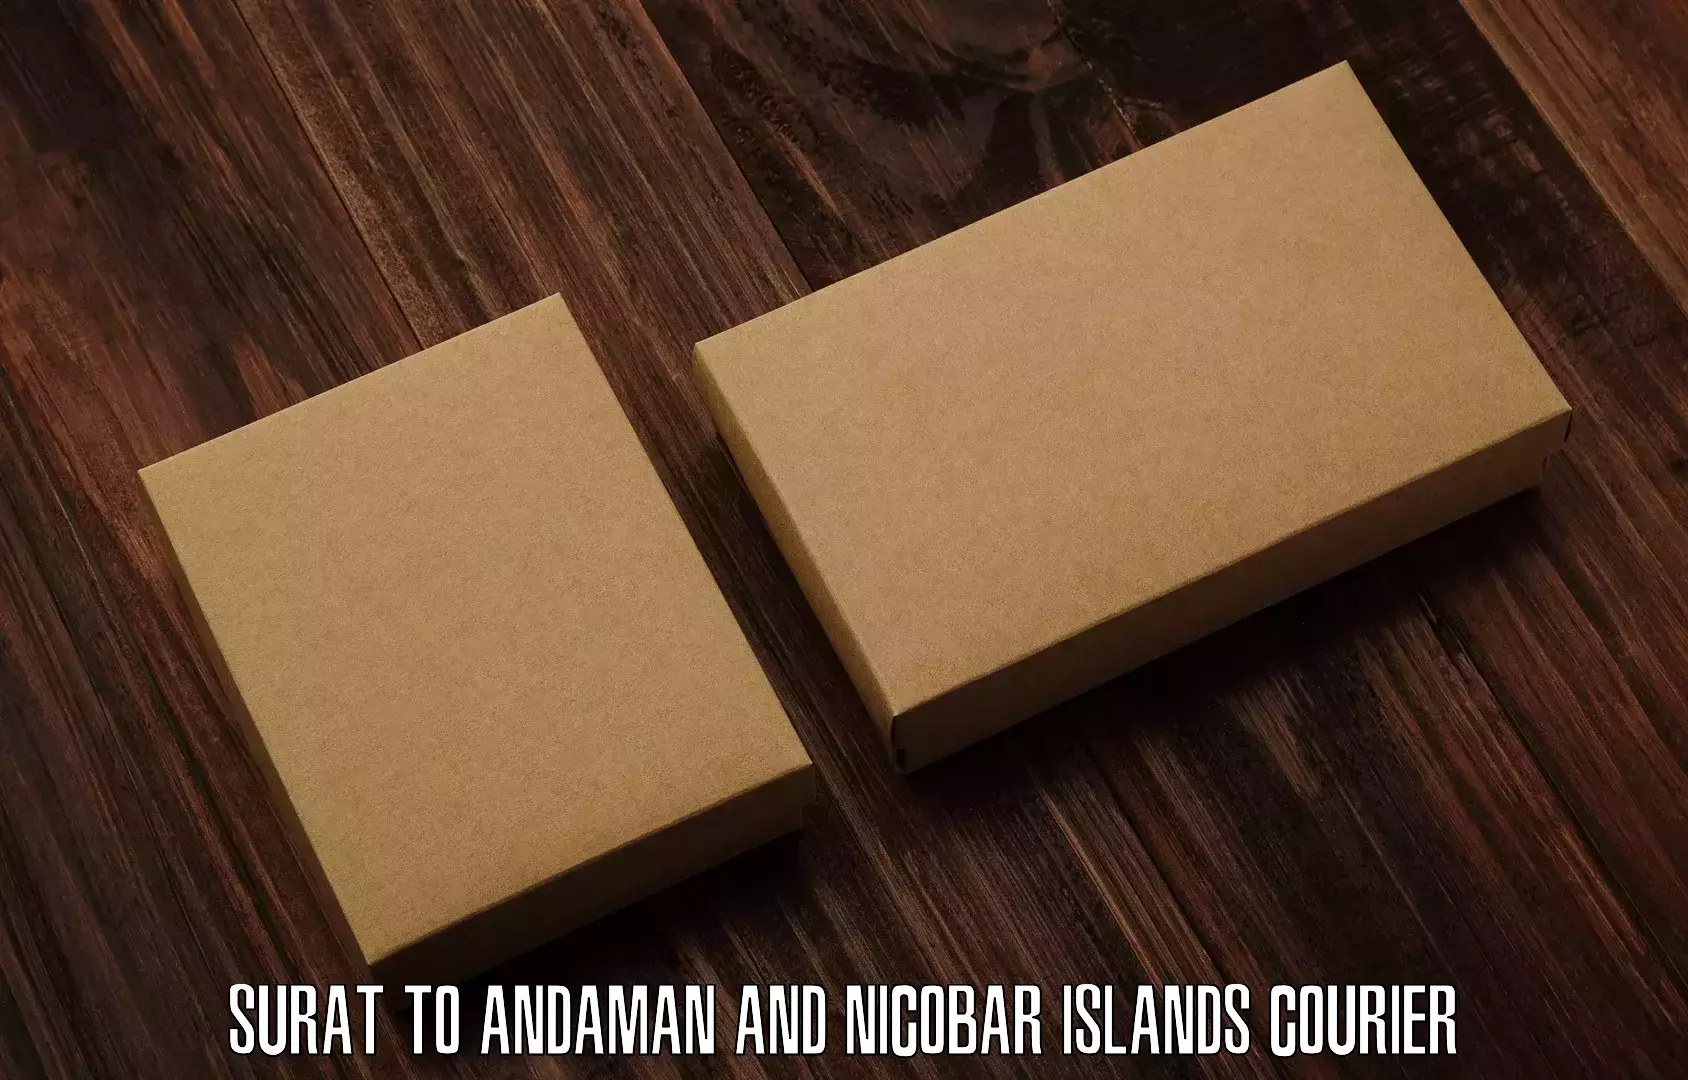 State-of-the-art courier technology Surat to North And Middle Andaman